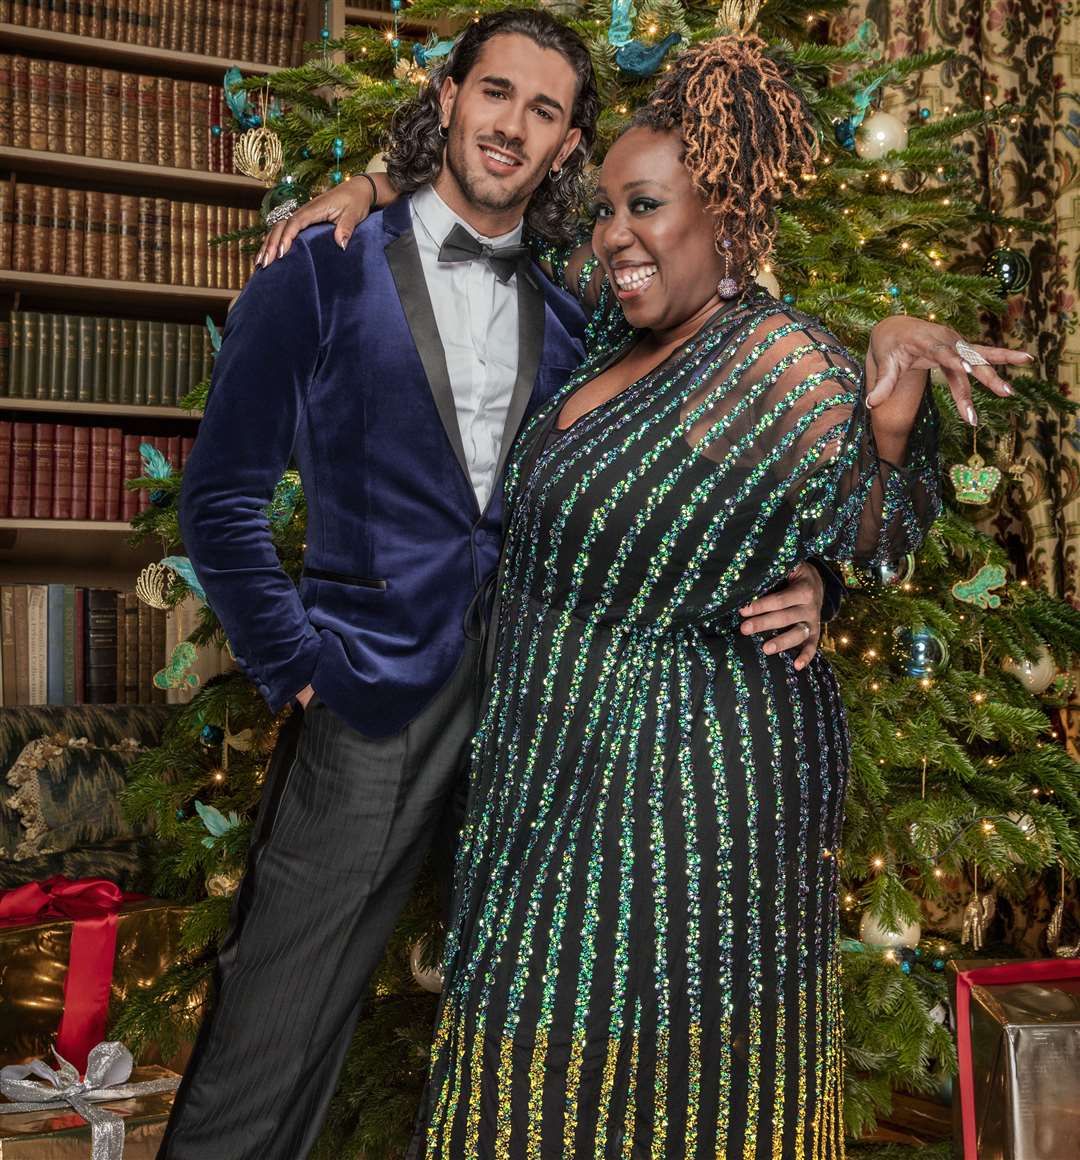 Chizzy Akudolu with partner Graziano Di Prima, who will star in the Strictly Come Dancing Christmas Special